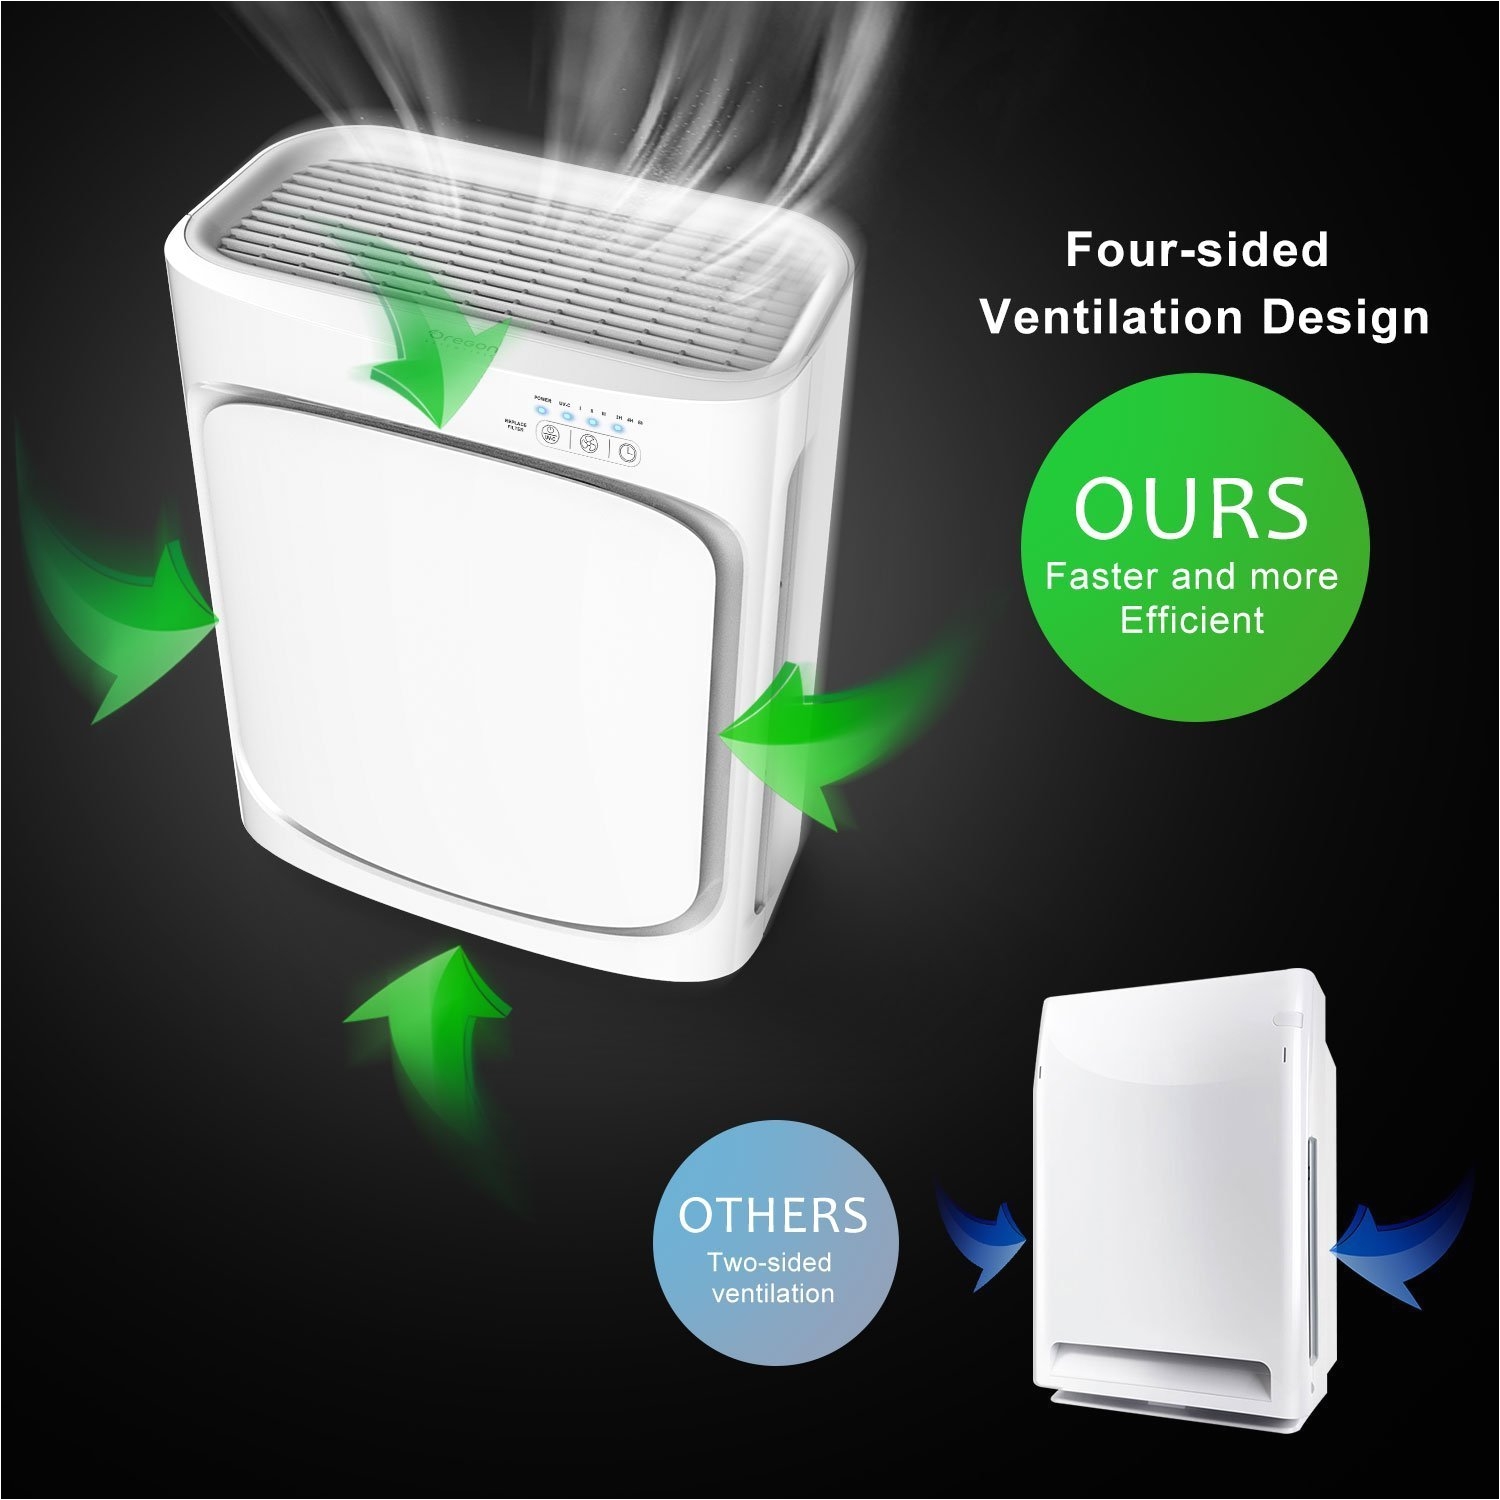 air purifier oregon scientific air cleaner with true hepa filter odor allergen eliminator with strong 4 side air intake uvc sanitizer quiet purif